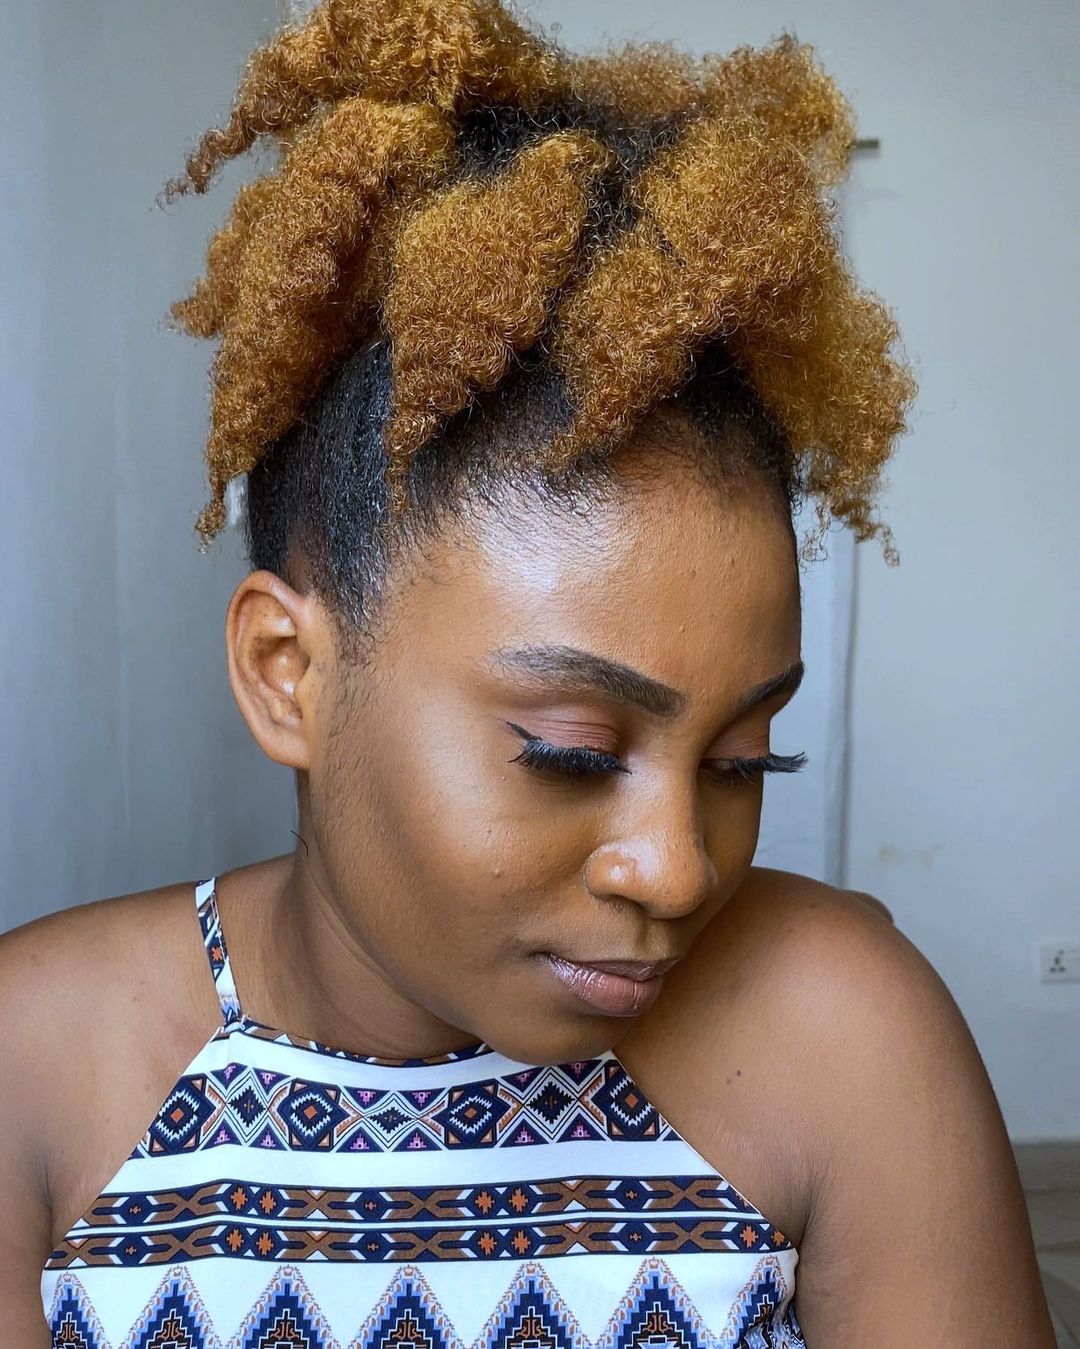 Updo Hairstyle for Black women 11 Black hair updo styles pictures | Black updo hairstyles with curls | black woman braids Updo Hairstyles for Black Women